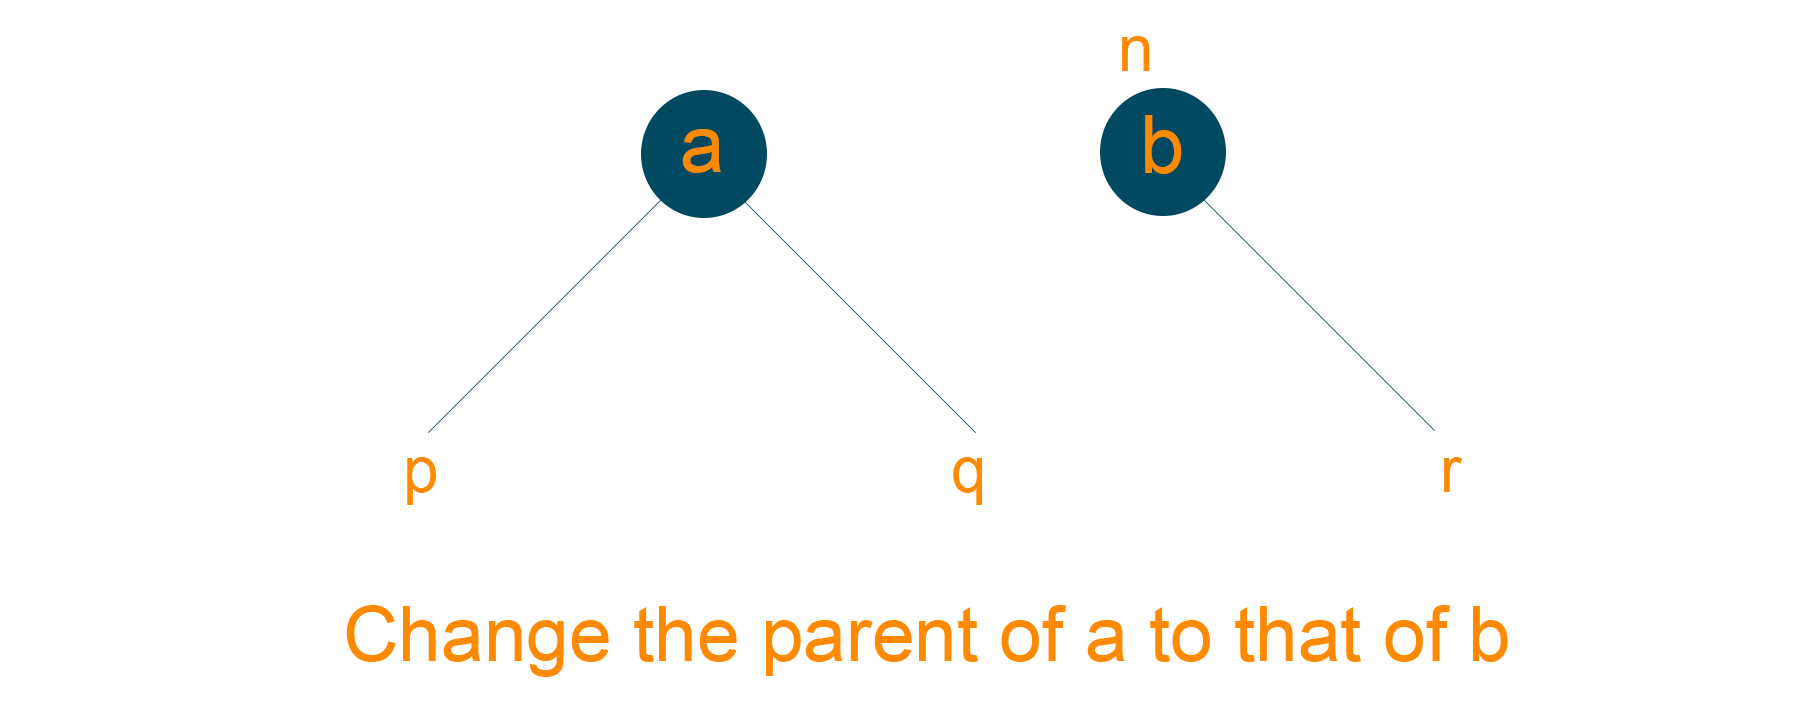 Changing the parent of A to that of B